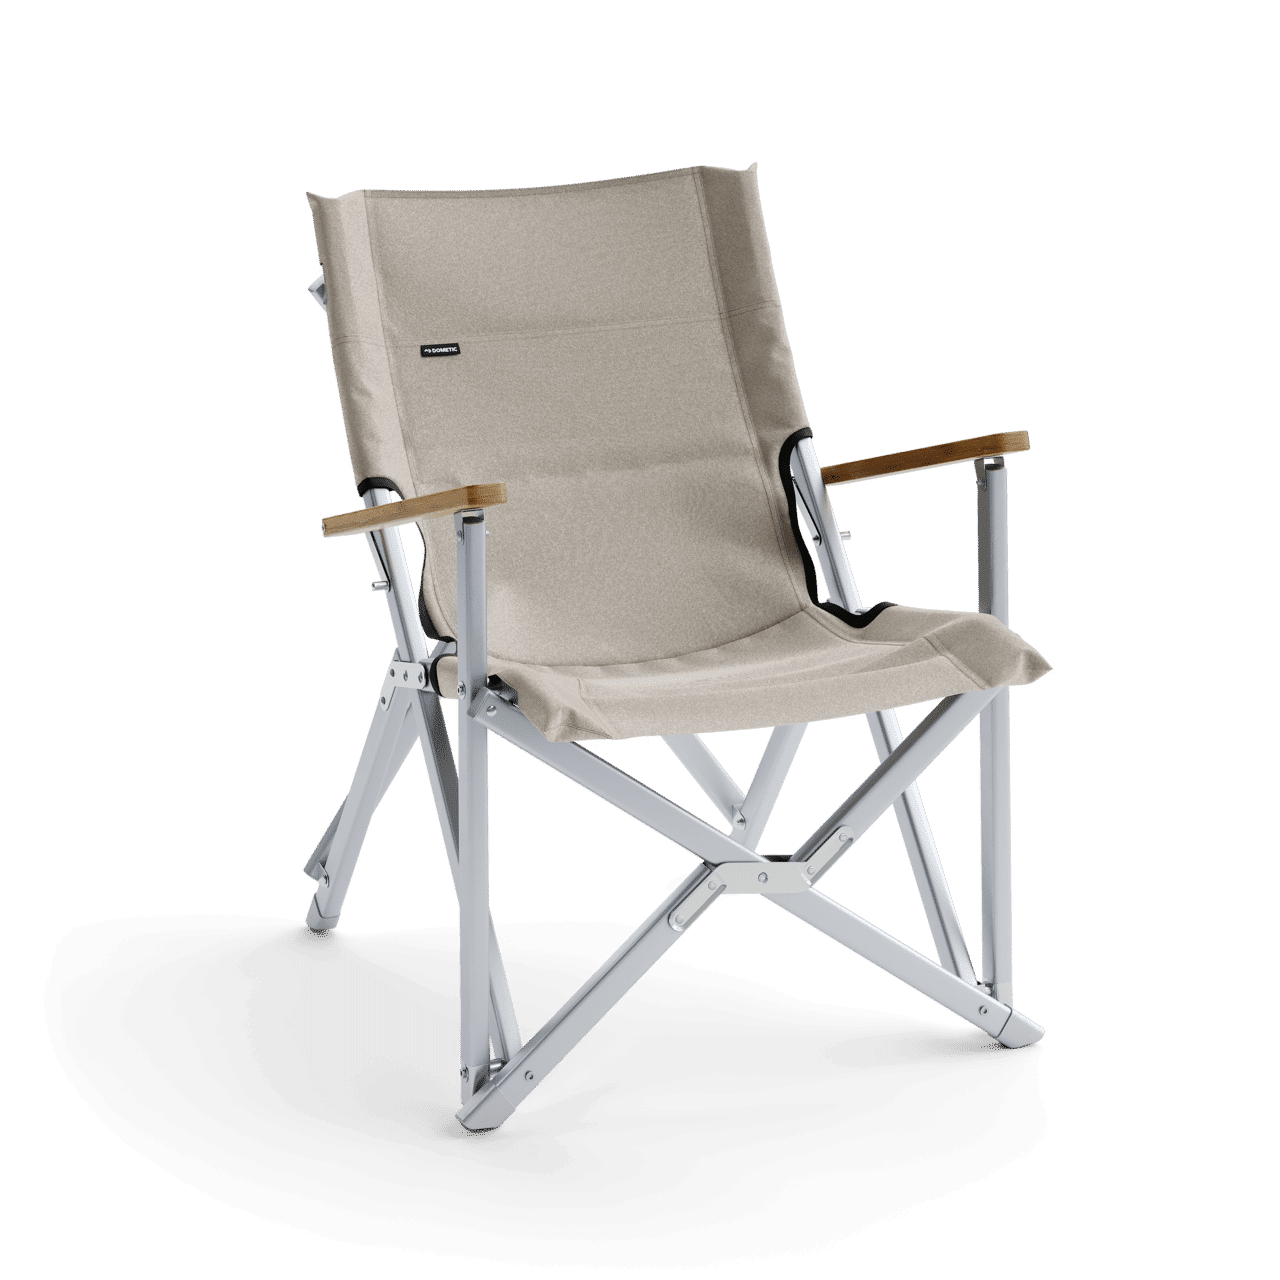 Dometic Compact Camp Chair - Camp chair | Hardloop